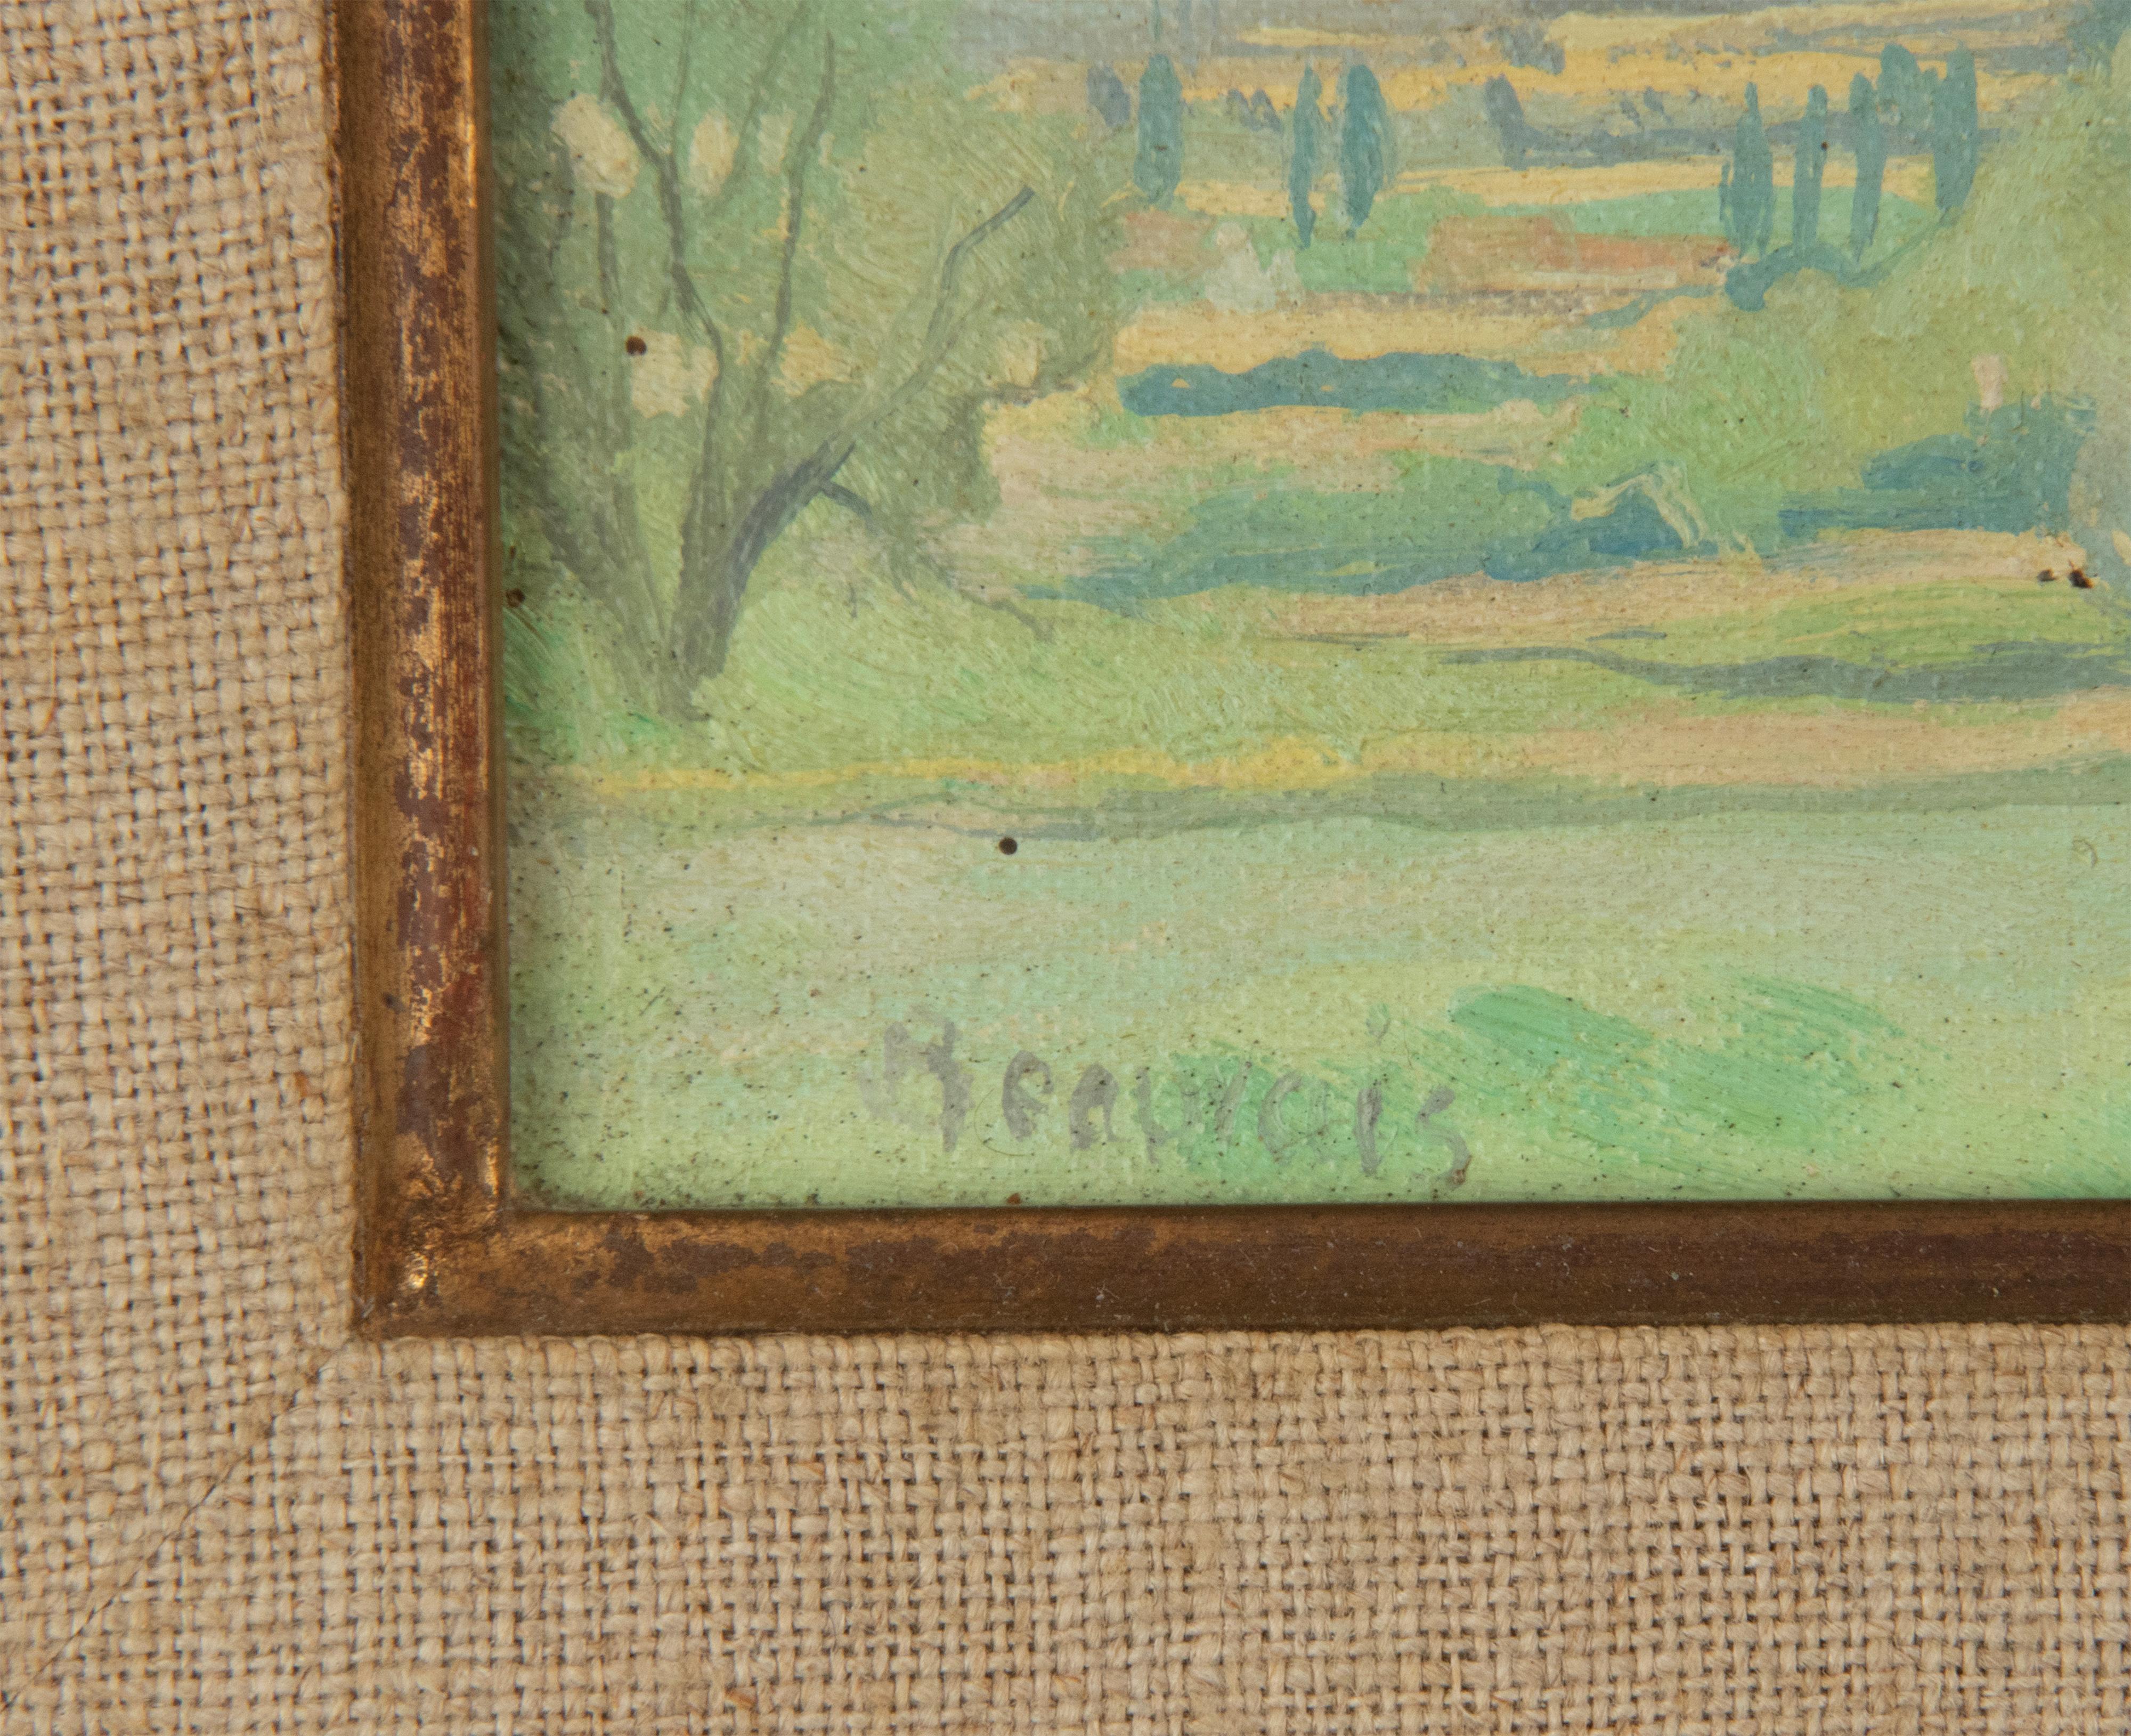 Canvas Mid-20th Century Oil Paint ing Landscape, Signed Beauvais For Sale